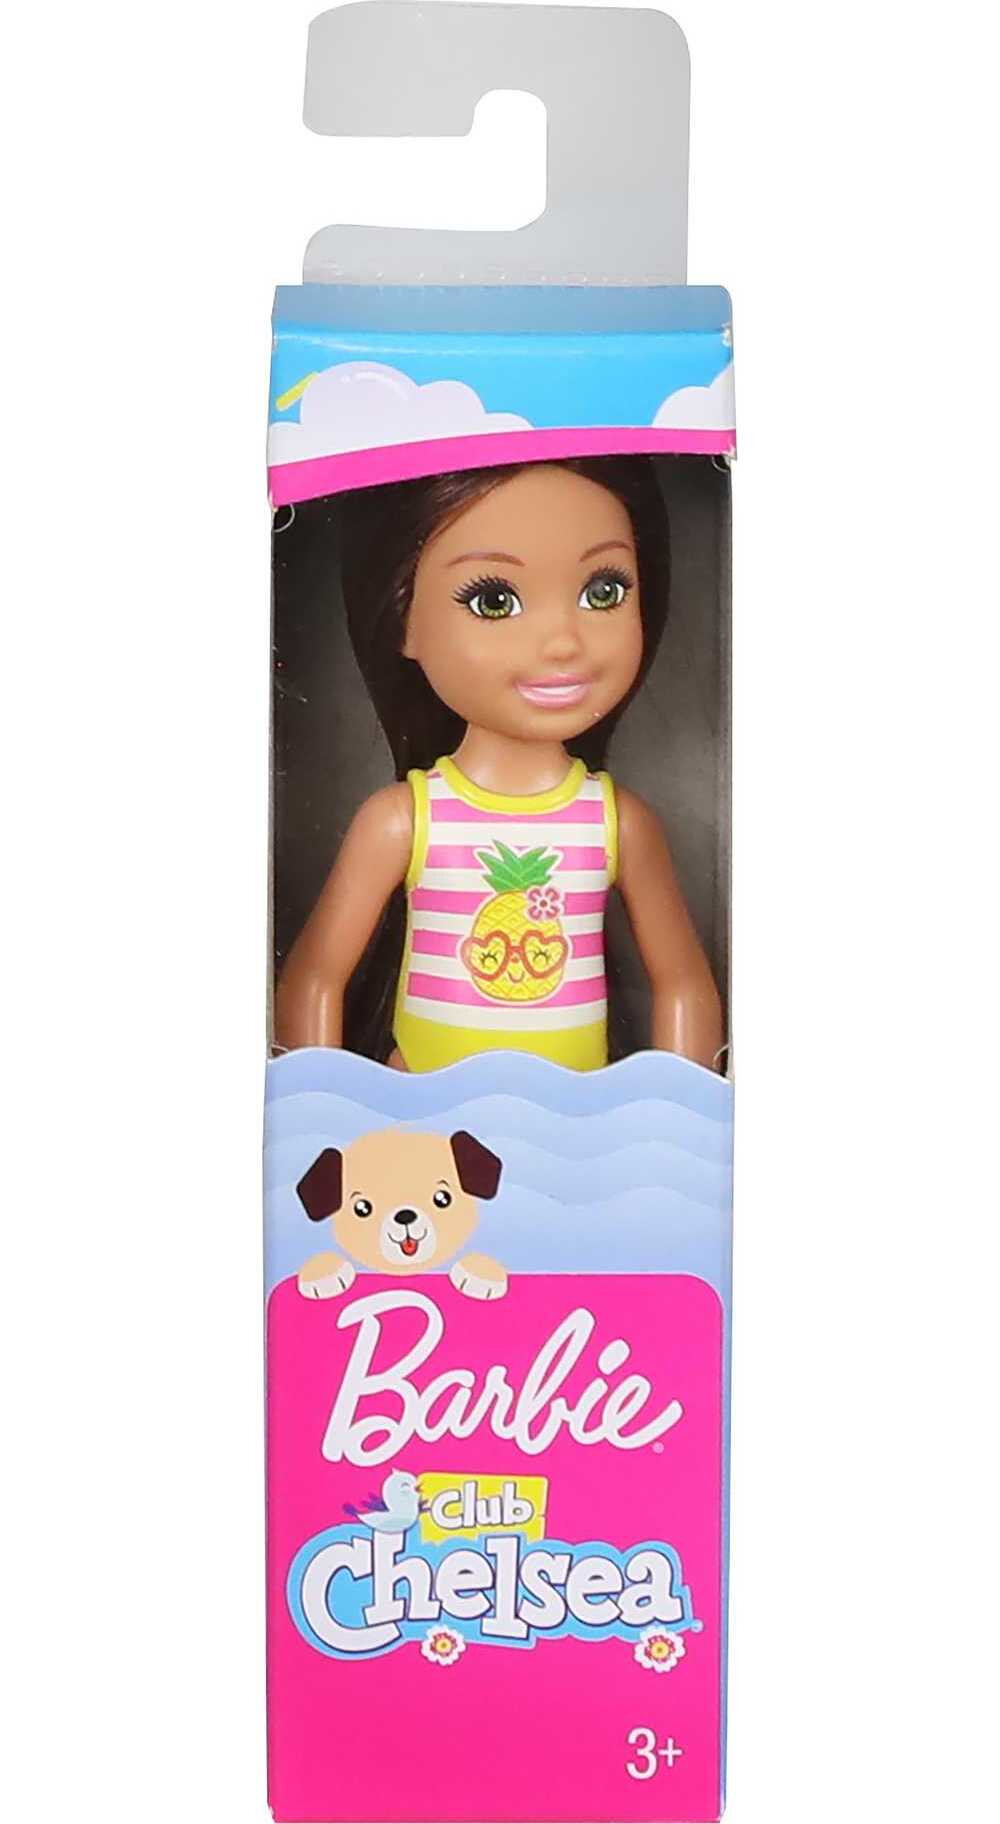 Barbie Club Chelsea Doll, Small Doll with Long Brown Hair, Green Eyes & Pineapple-Graphic Swimsuit - image 5 of 5